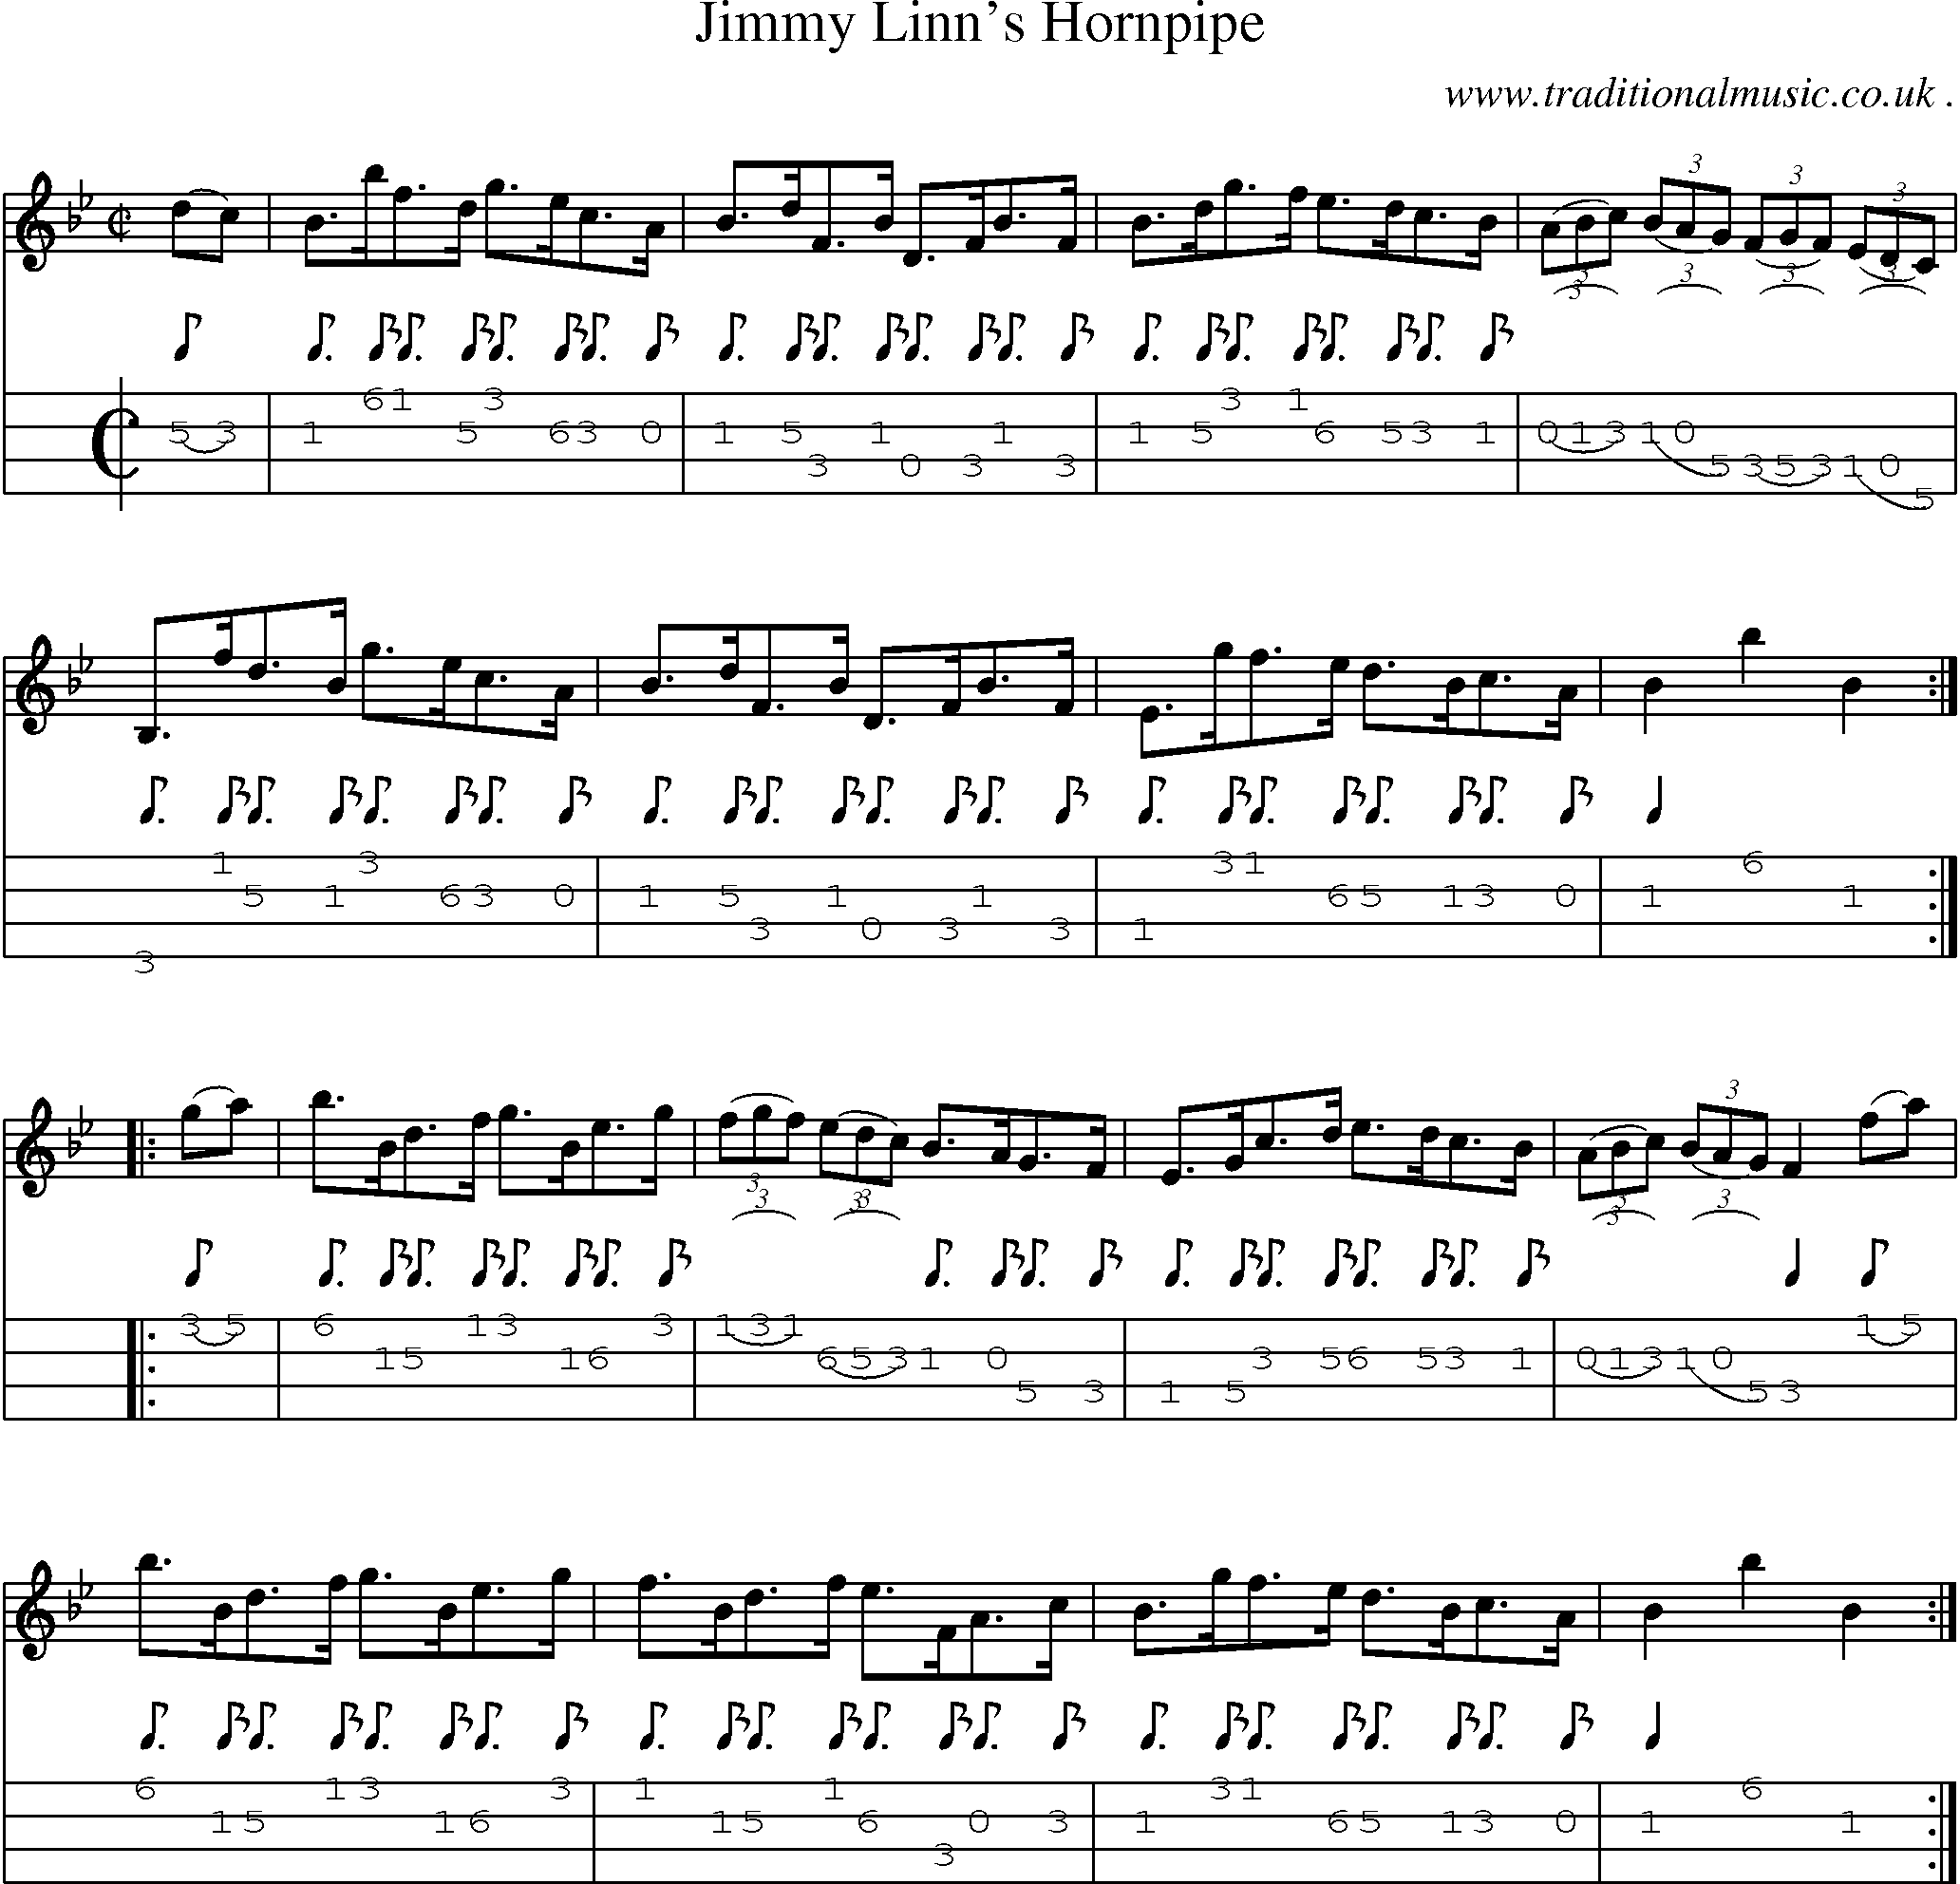 Sheet-Music and Mandolin Tabs for Jimmy Linns Hornpipe